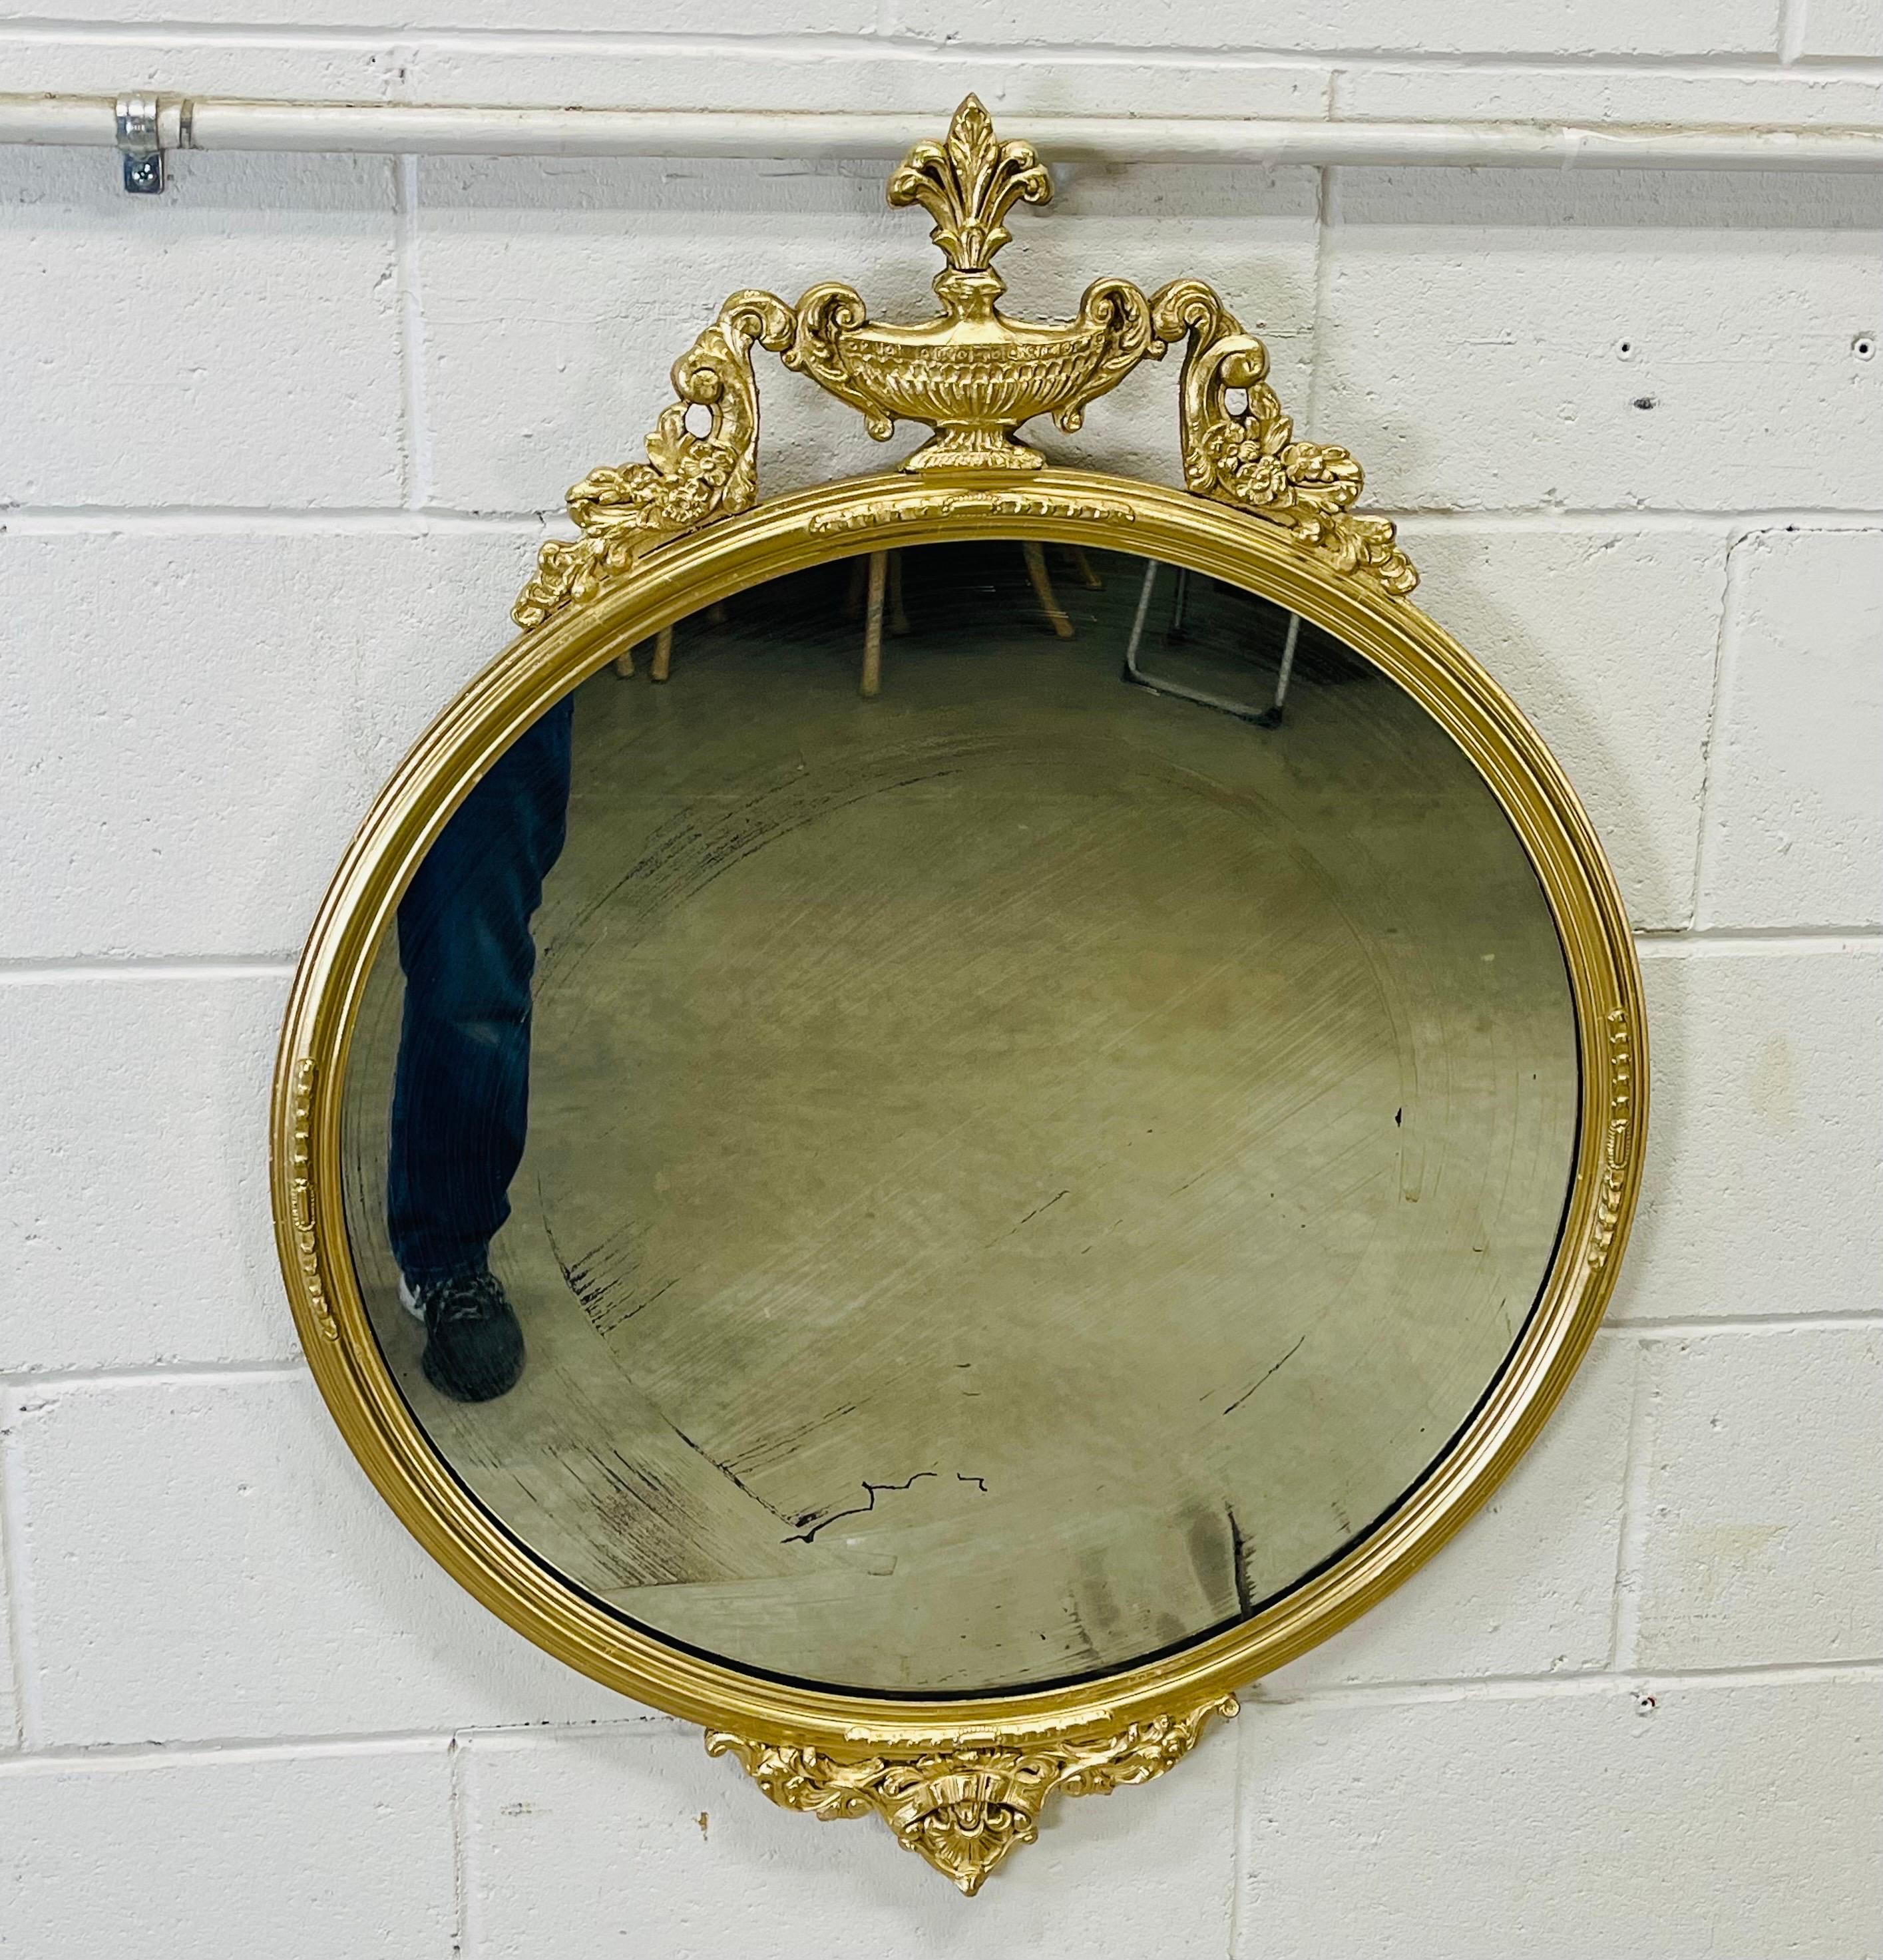 Vintage Federal style gilt painted round wood wall mirror. Some haze in the mirror from age. Hardware is included. No marks.